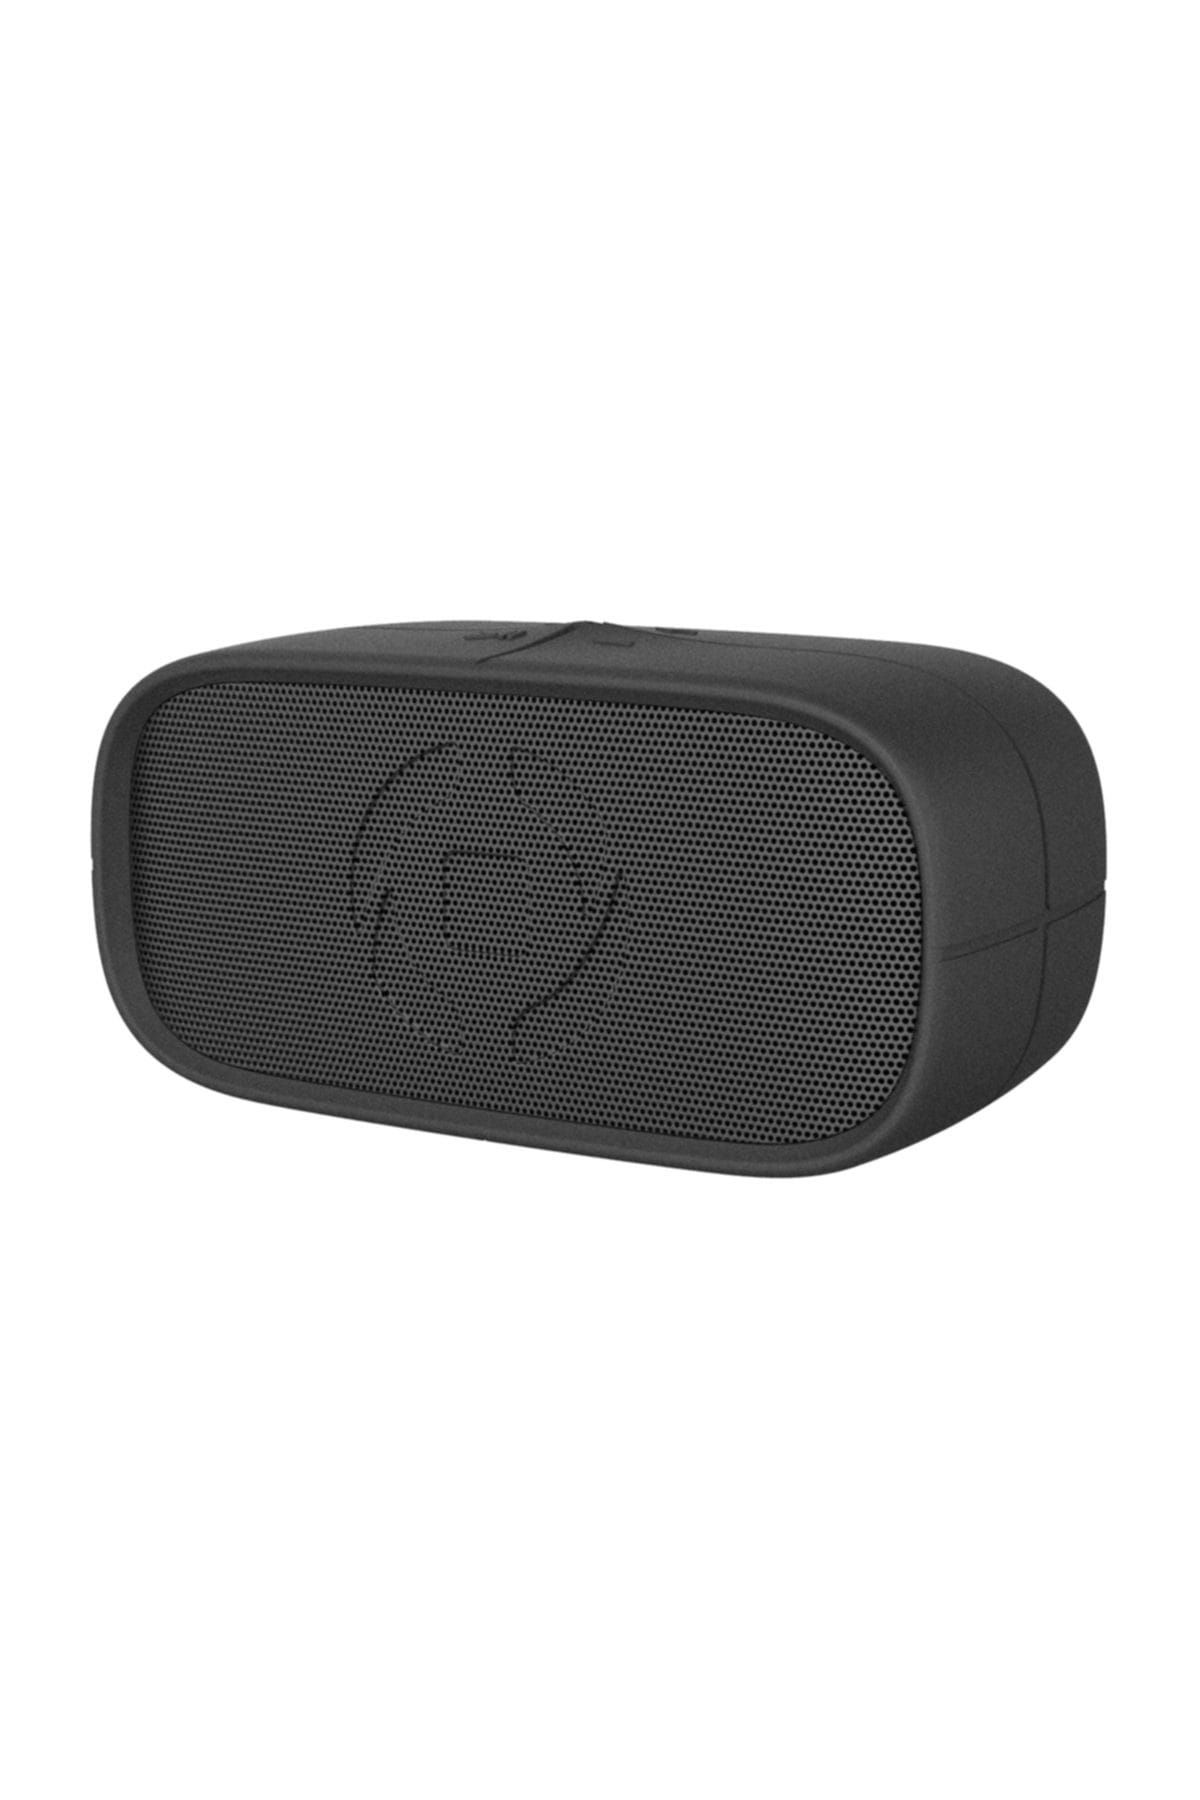 Celly UP Maxi Bluetooth Speaker - Siyah